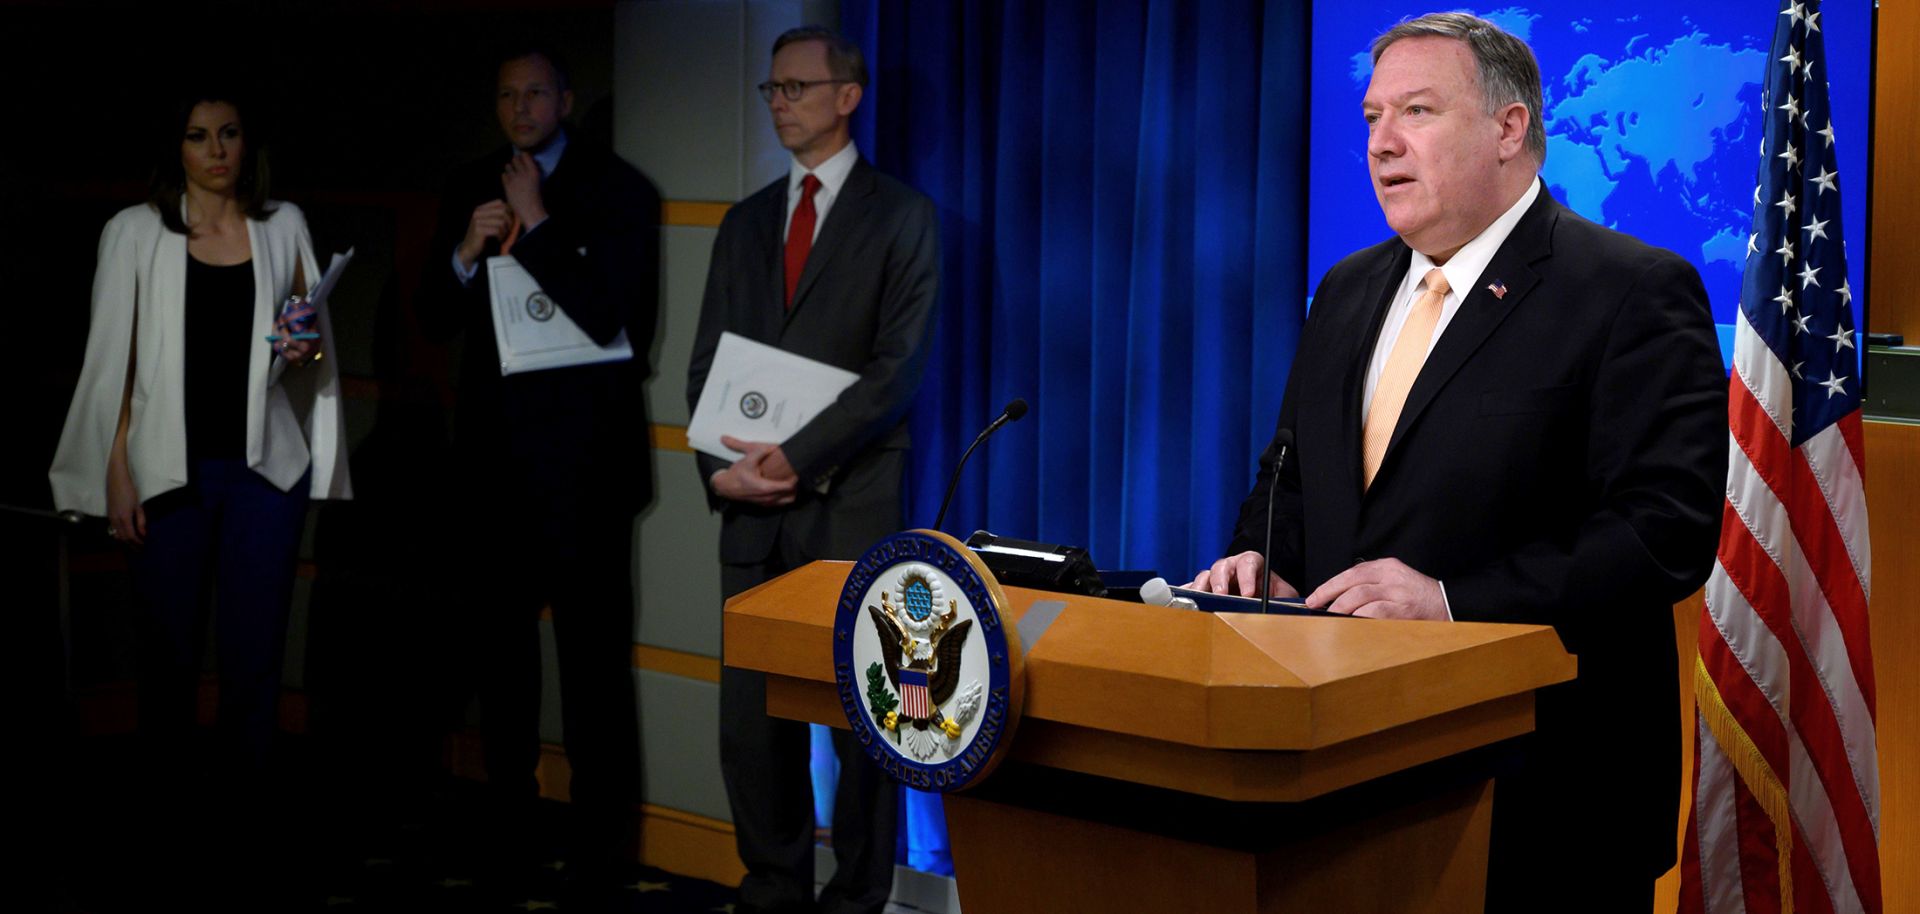 U.S. Secretary of State Mike Pompeo speaks during a press conference at the U.S. Department of State in Washington on April 22, 2019, in which he announced that the United States would no longer grant exemptions to Iran’s oil customers.